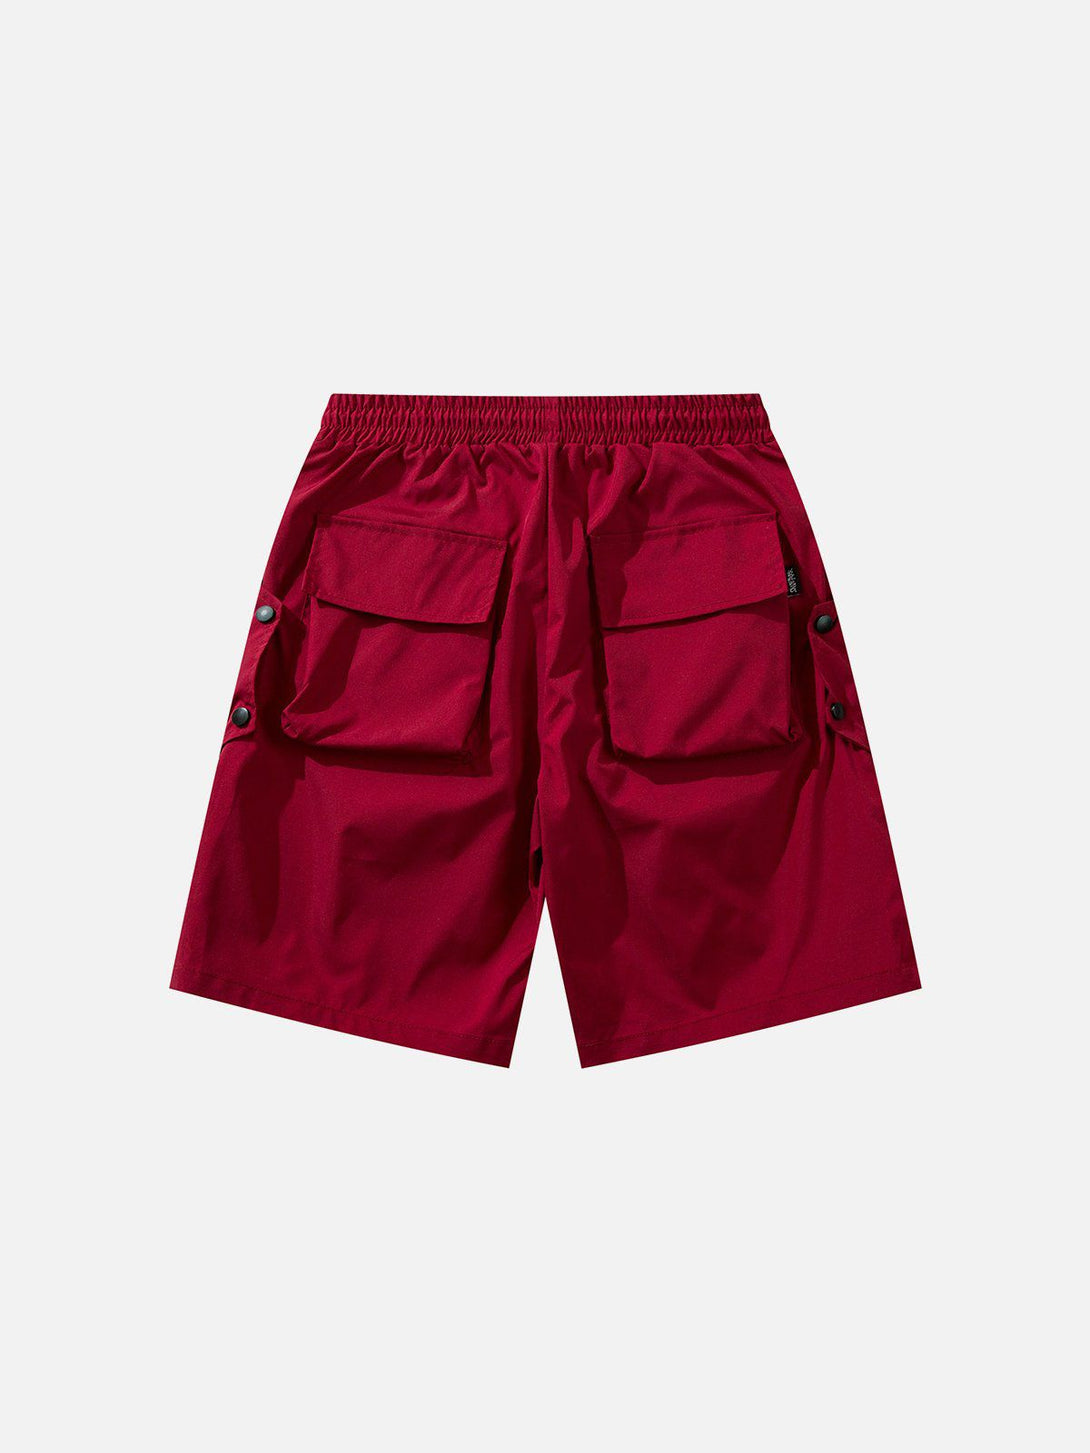 Levefly - Buckle Decoration Solid Shorts - Streetwear Fashion - levefly.com